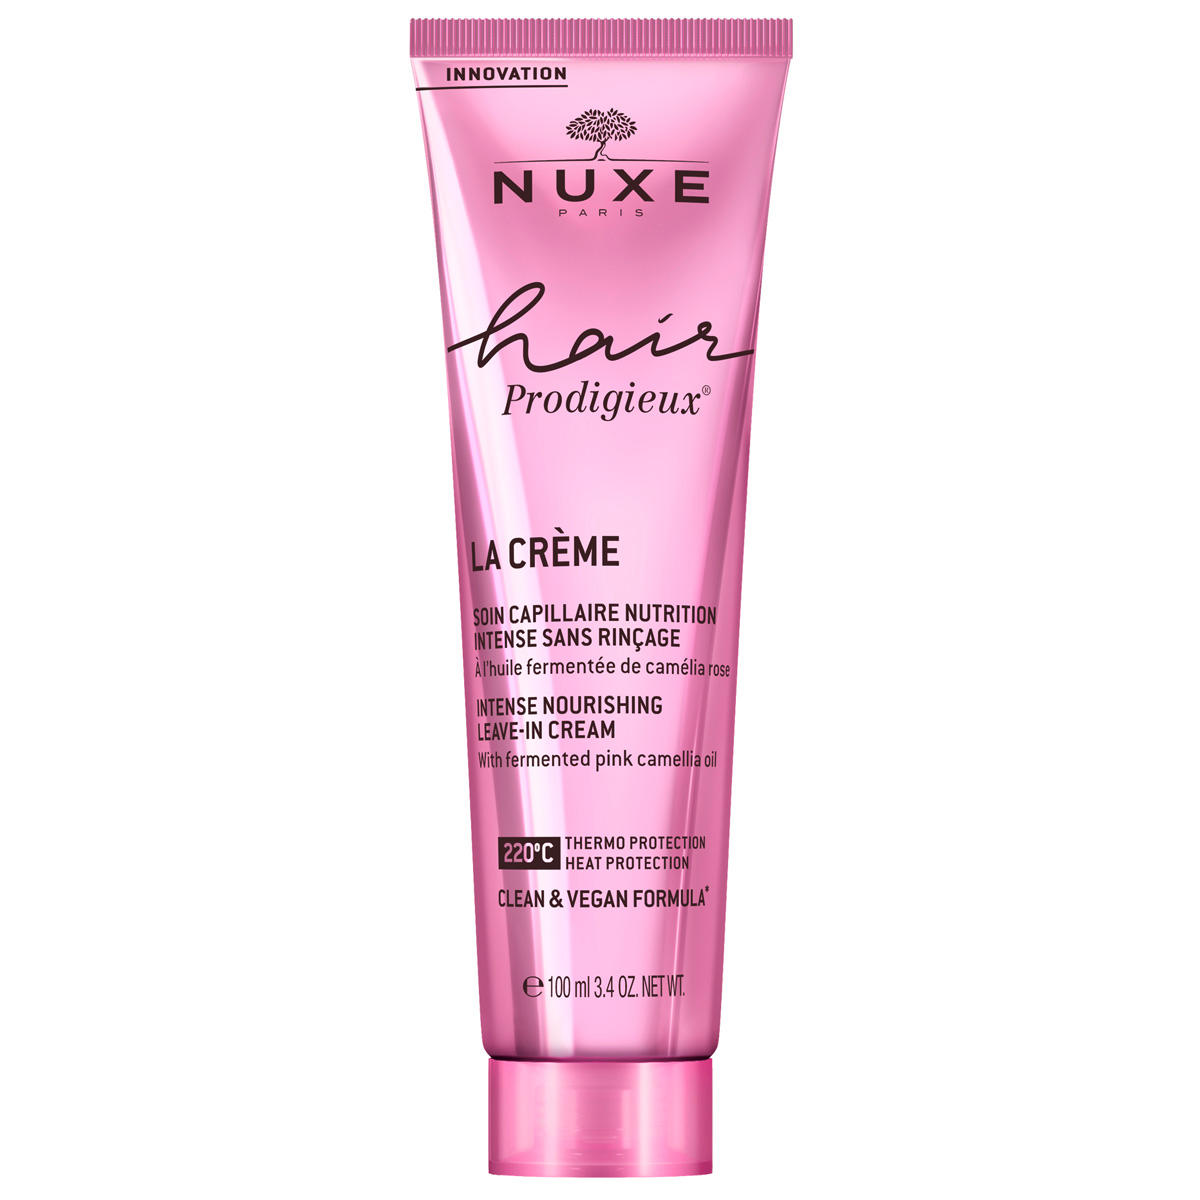 NUXE Hair Prodigieux Crema Leave-In Nutriente Intensa 100 ml - 1